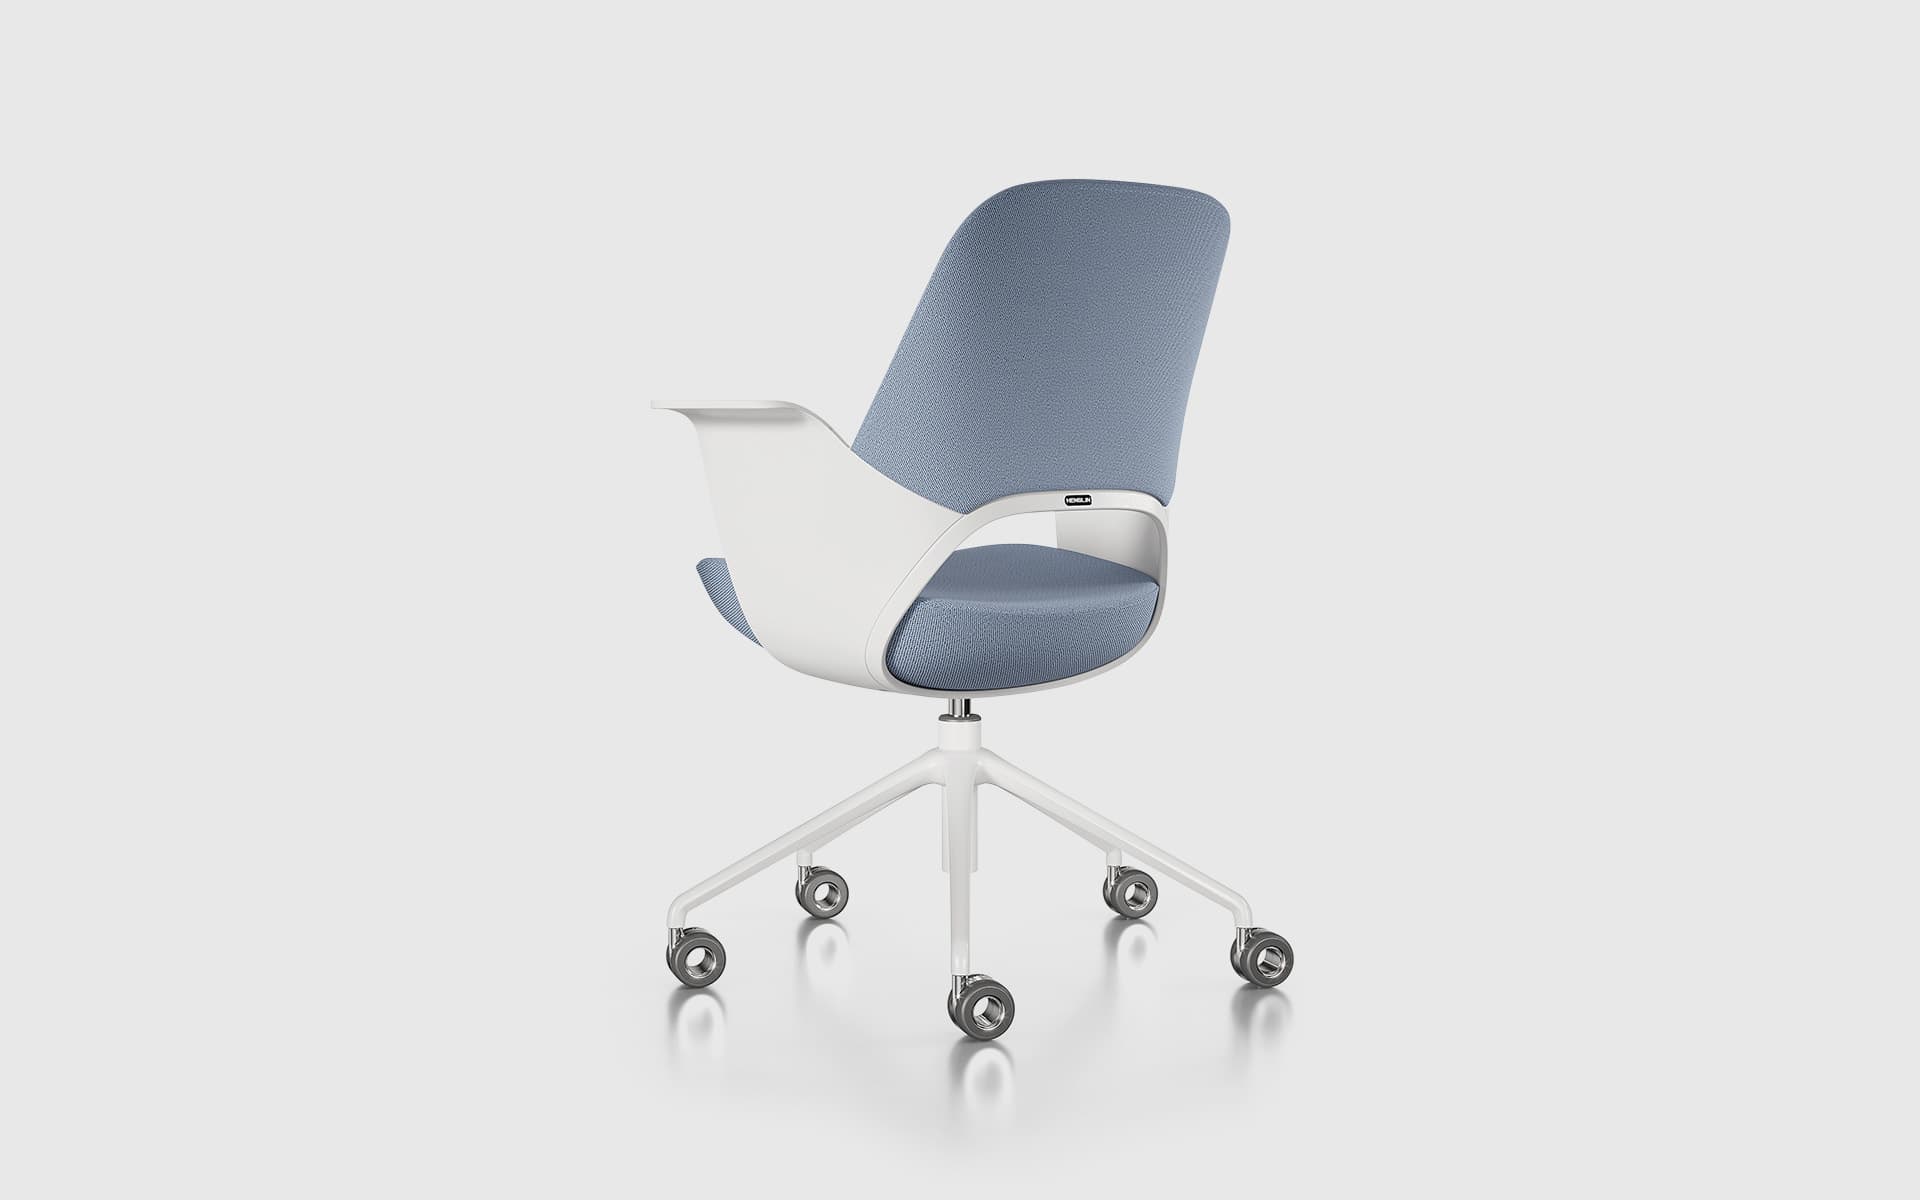 Back view of a Henglin Caia office chair by ITO Design with blue upholstery